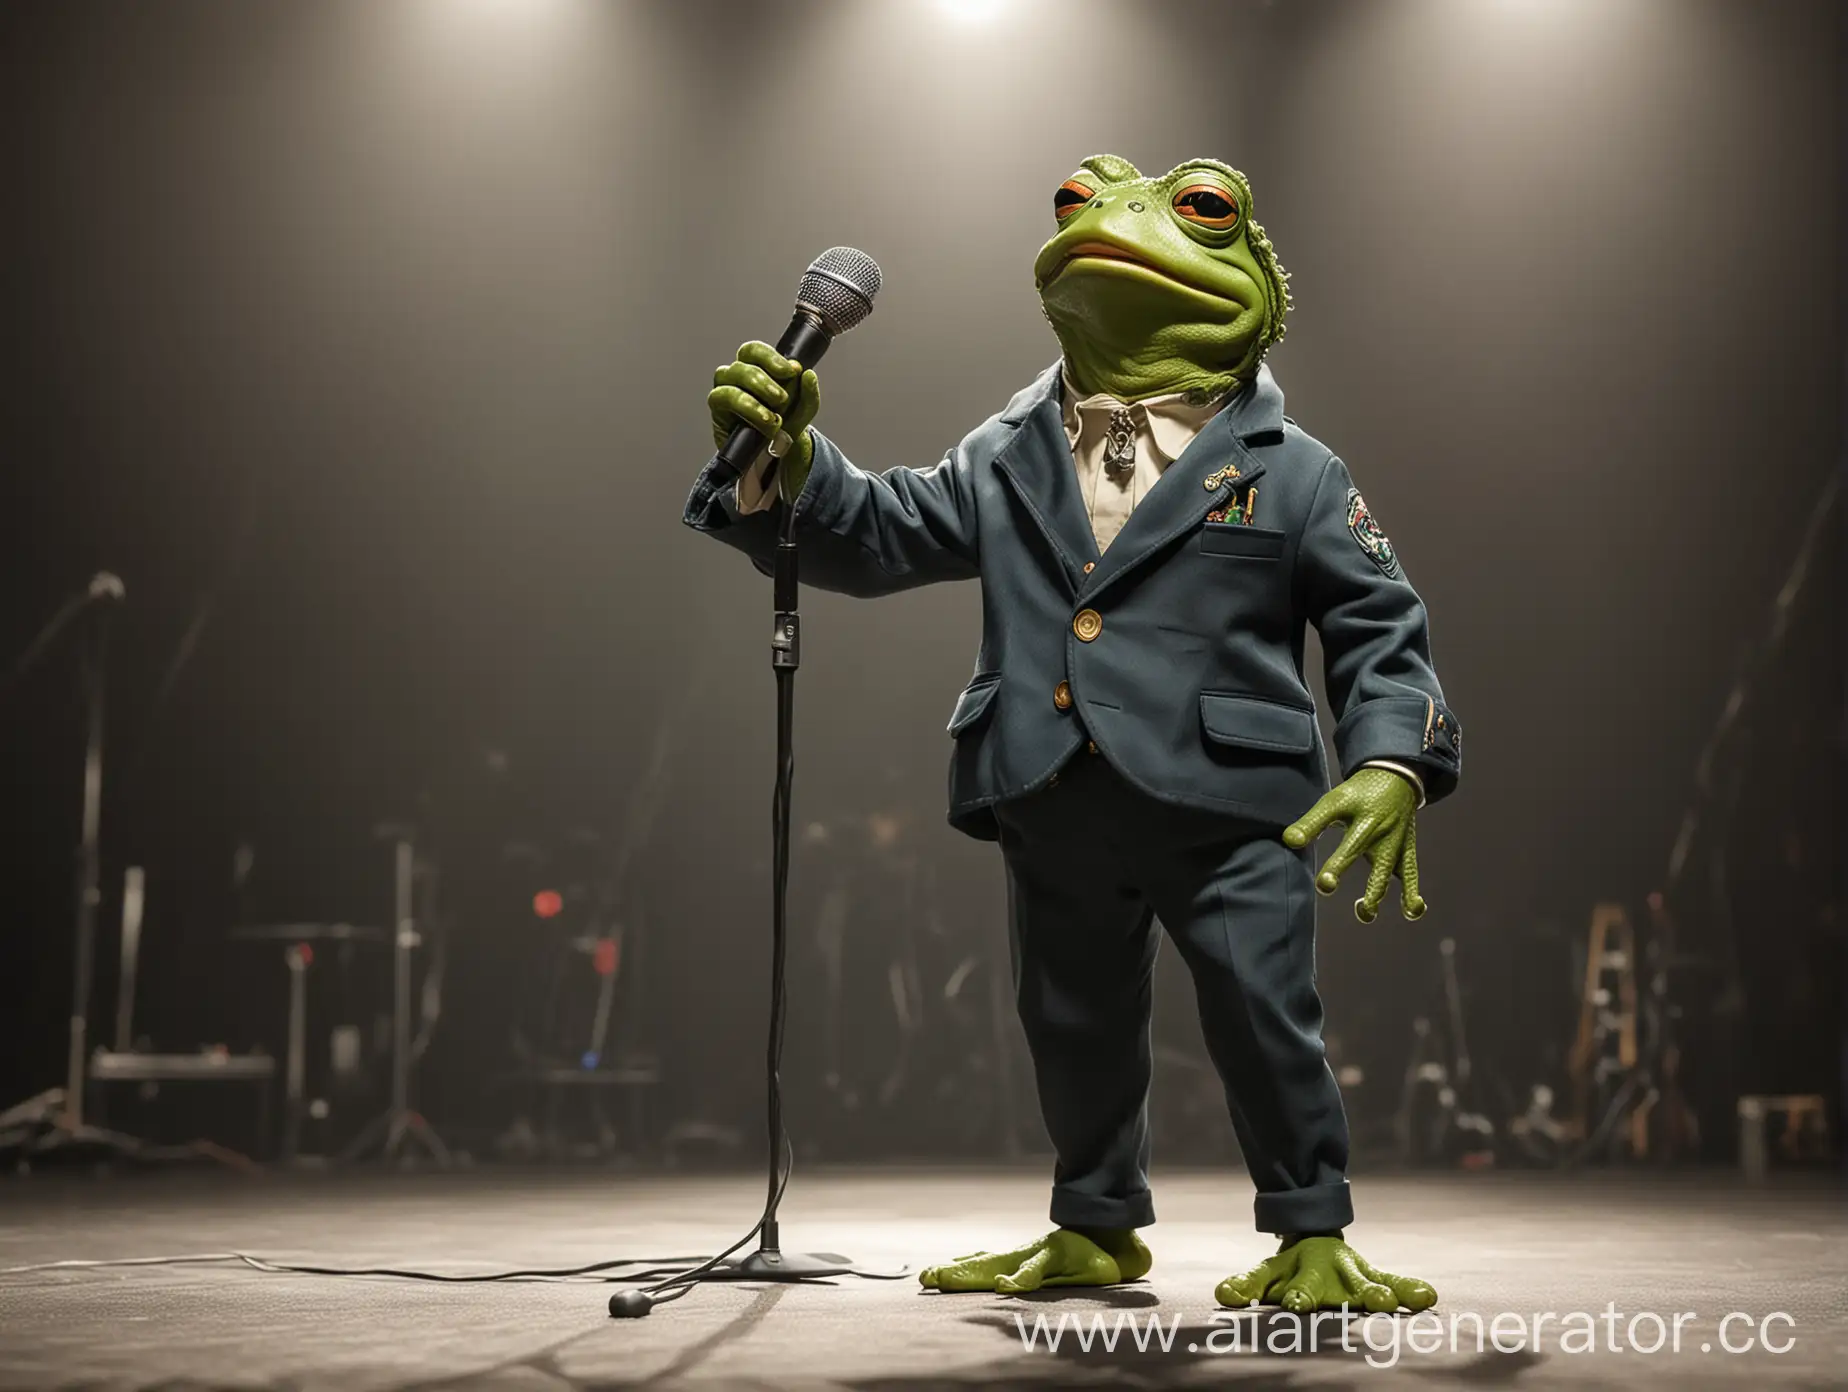 Stylish-Frog-Pepe-Performing-On-Stage-with-Microphone